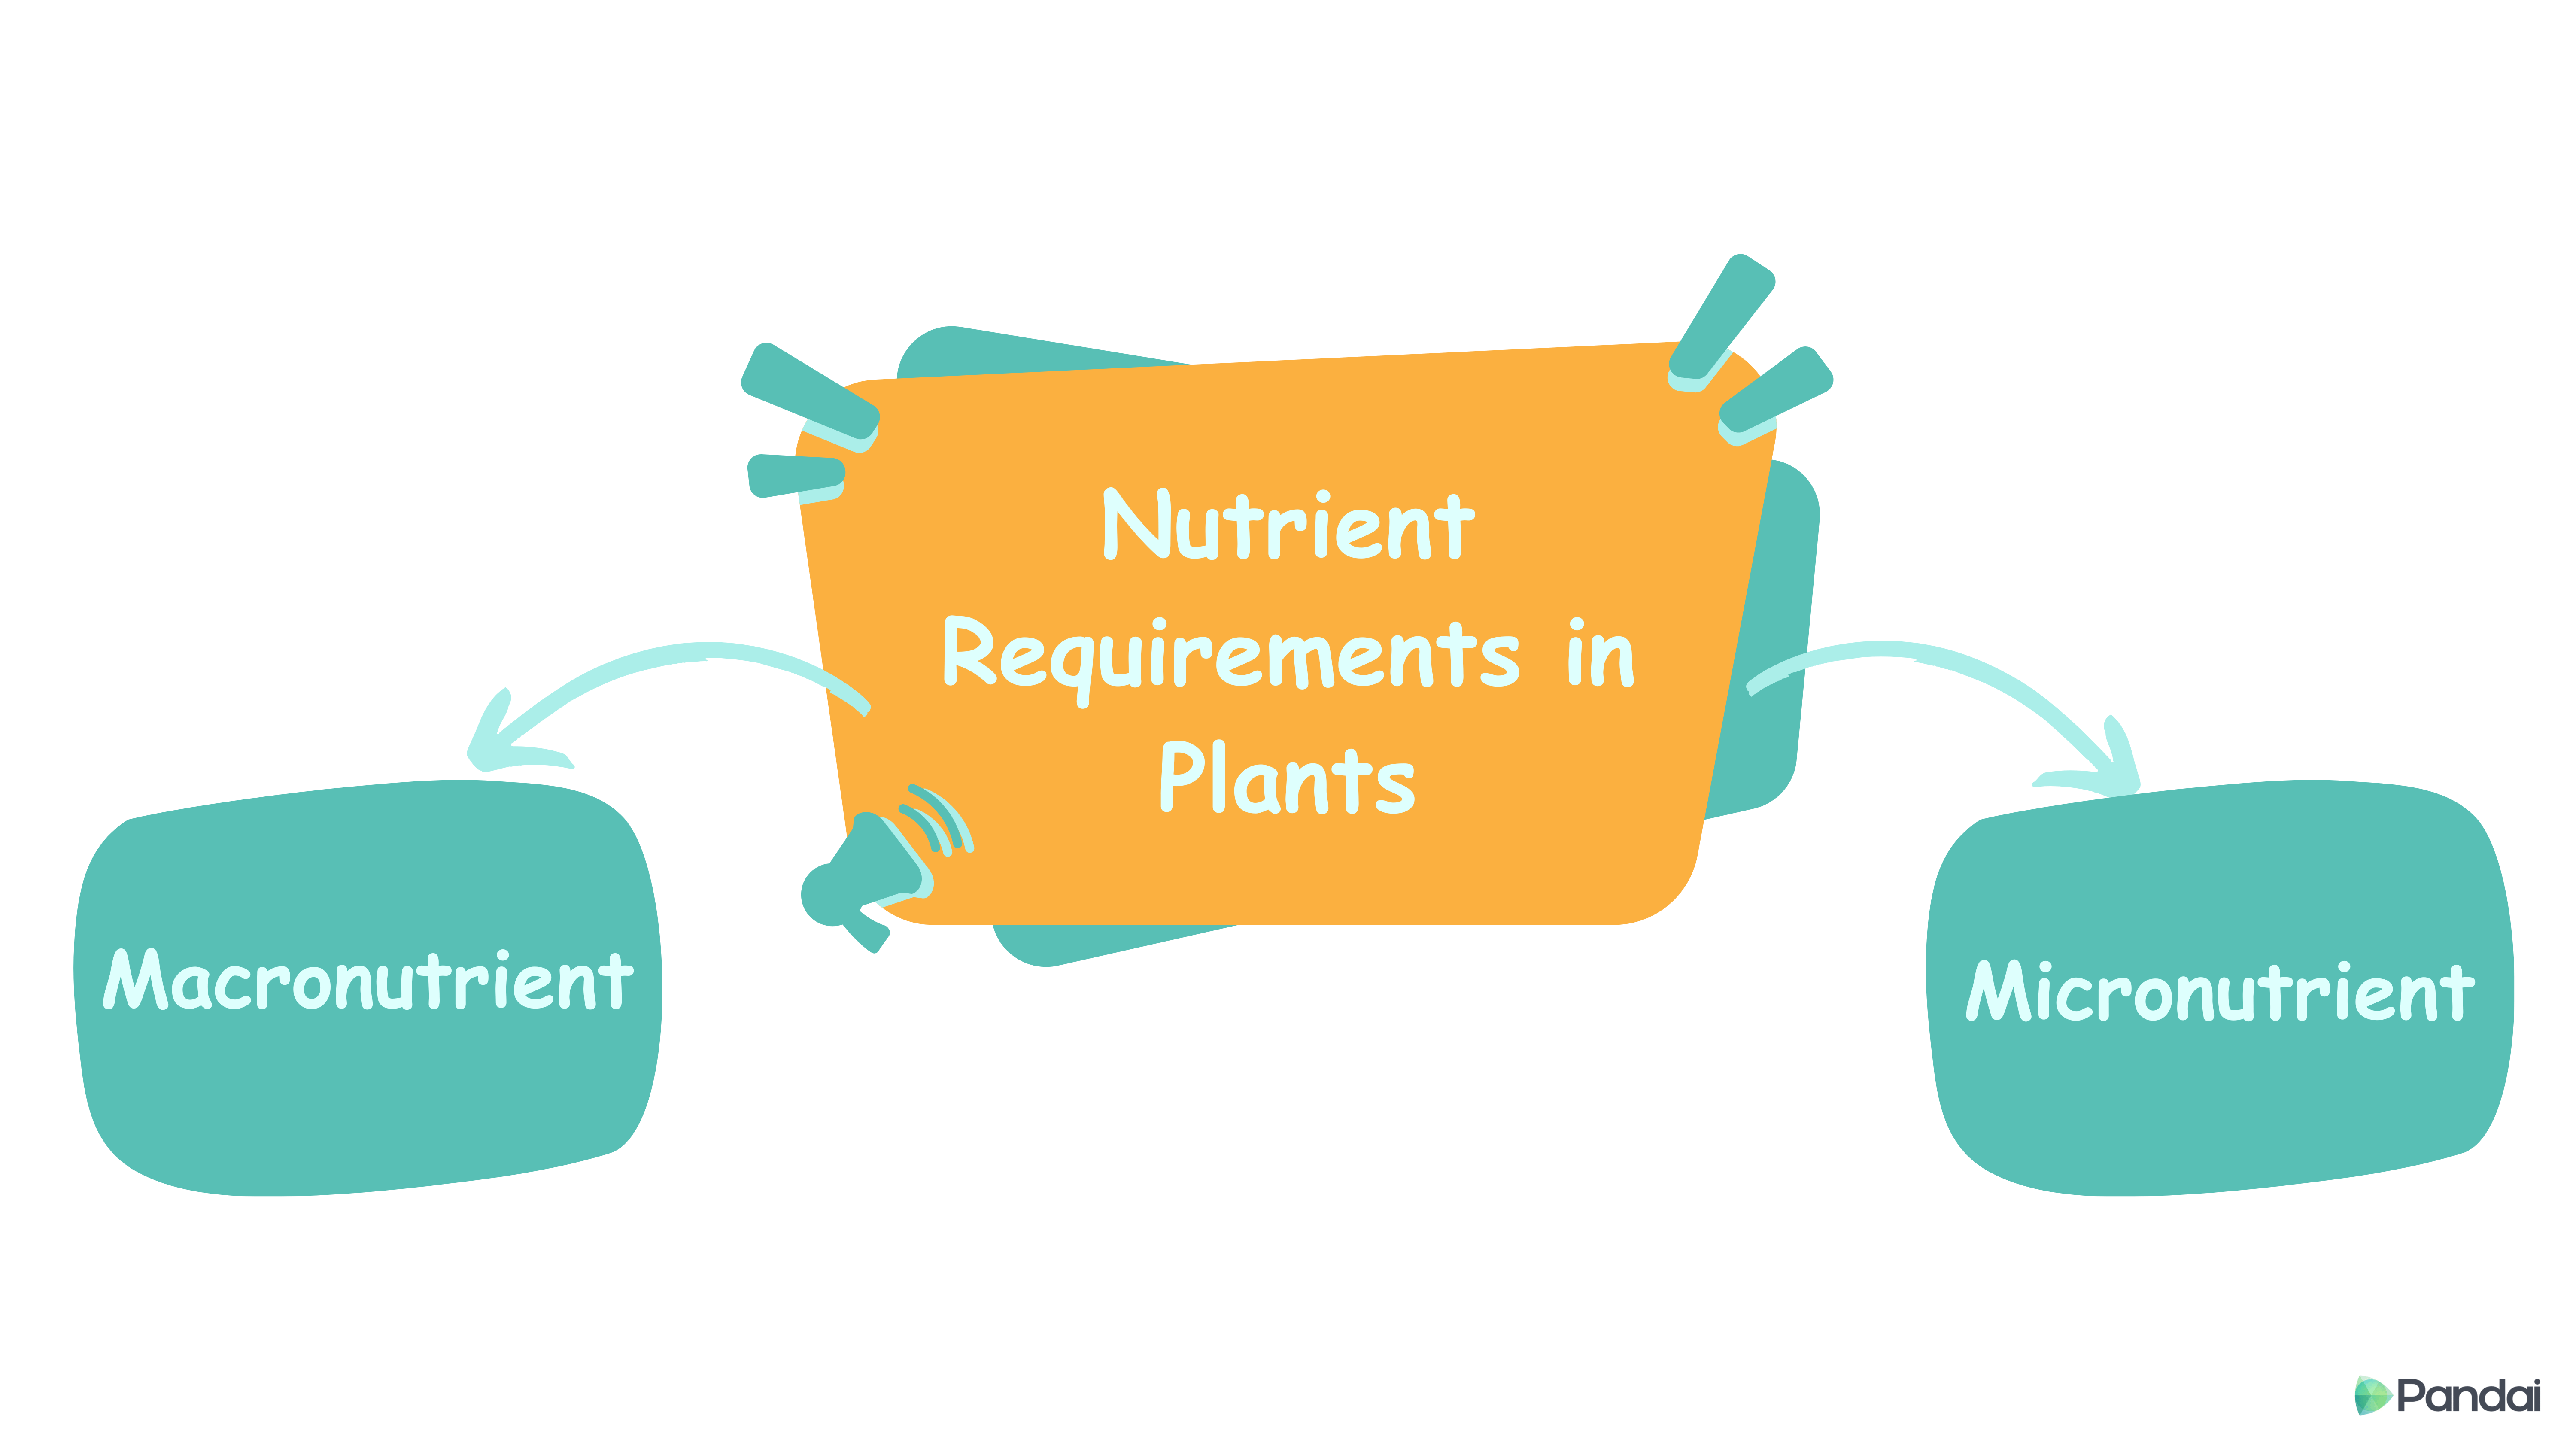 Nutrient Requirements in Plants